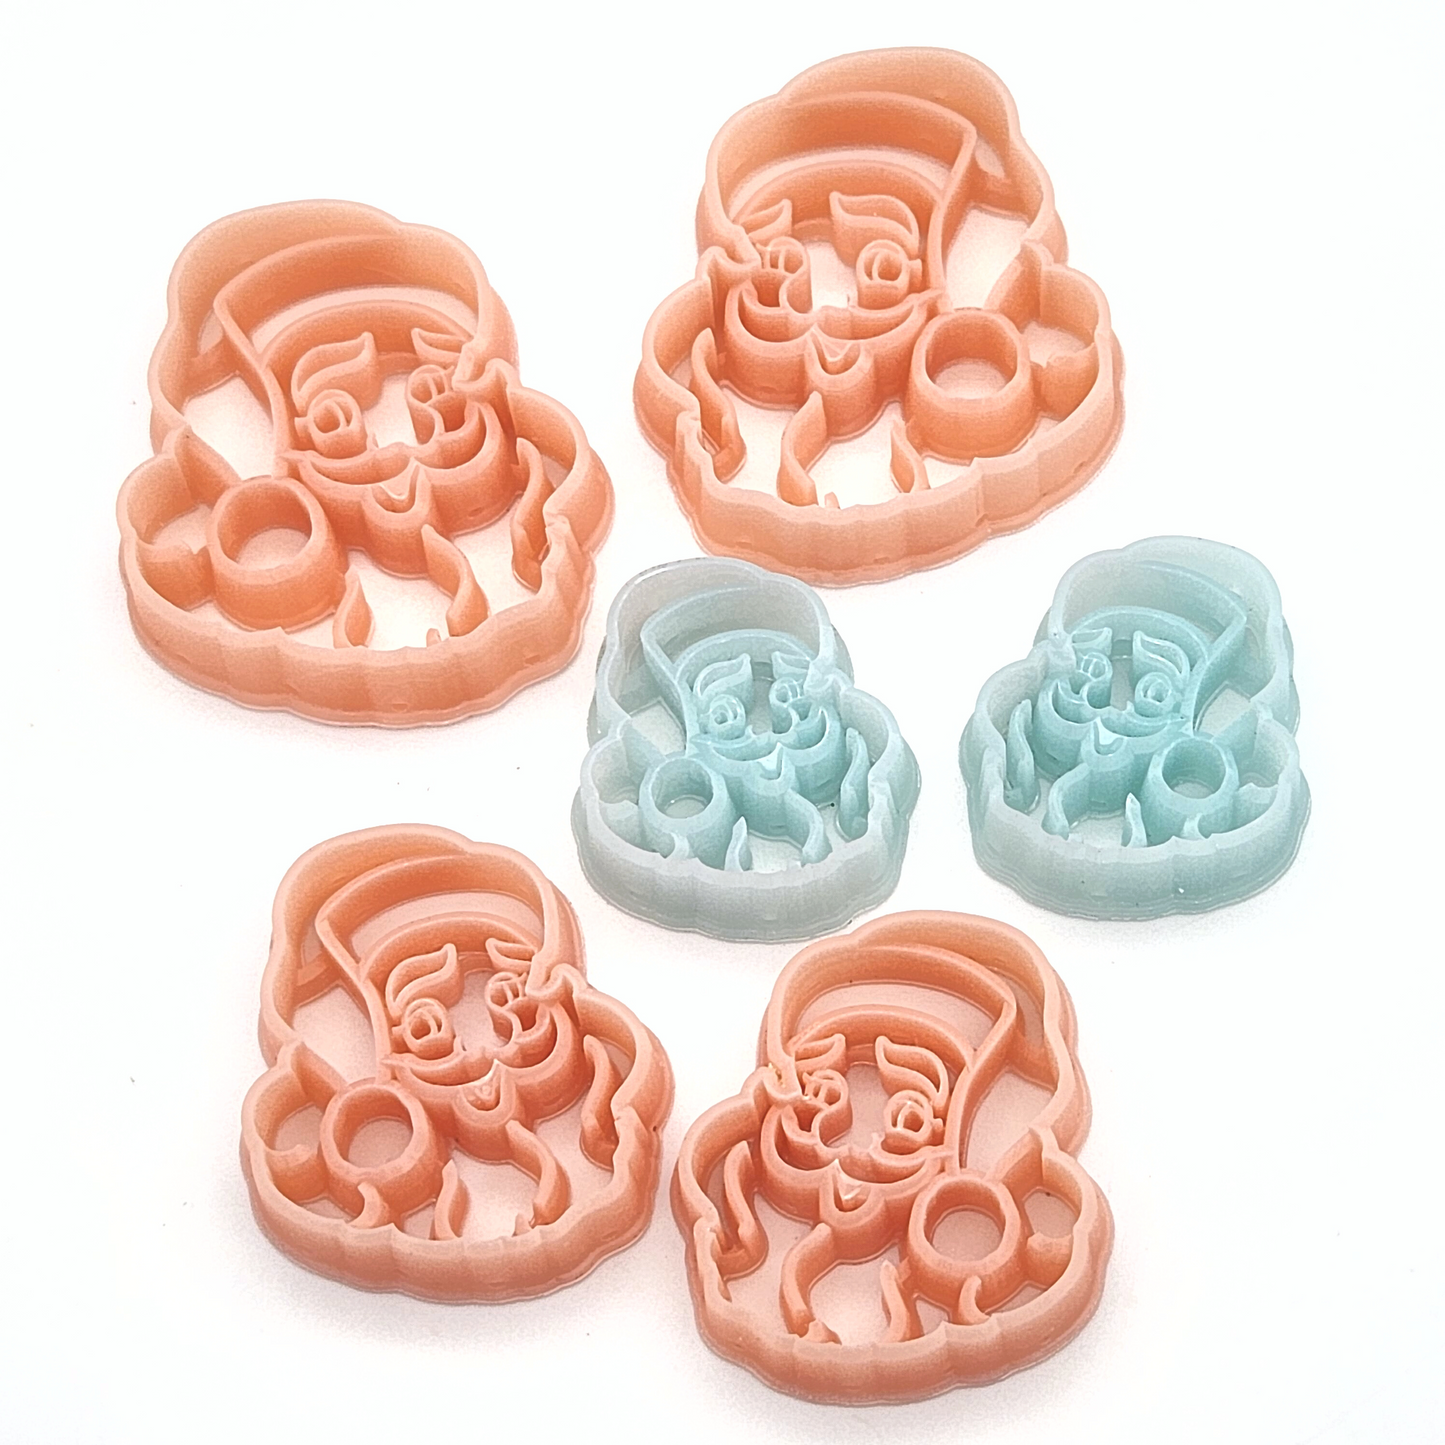 Mirrored set of Vintage Santa Claus cutters for polymer clay crafting.